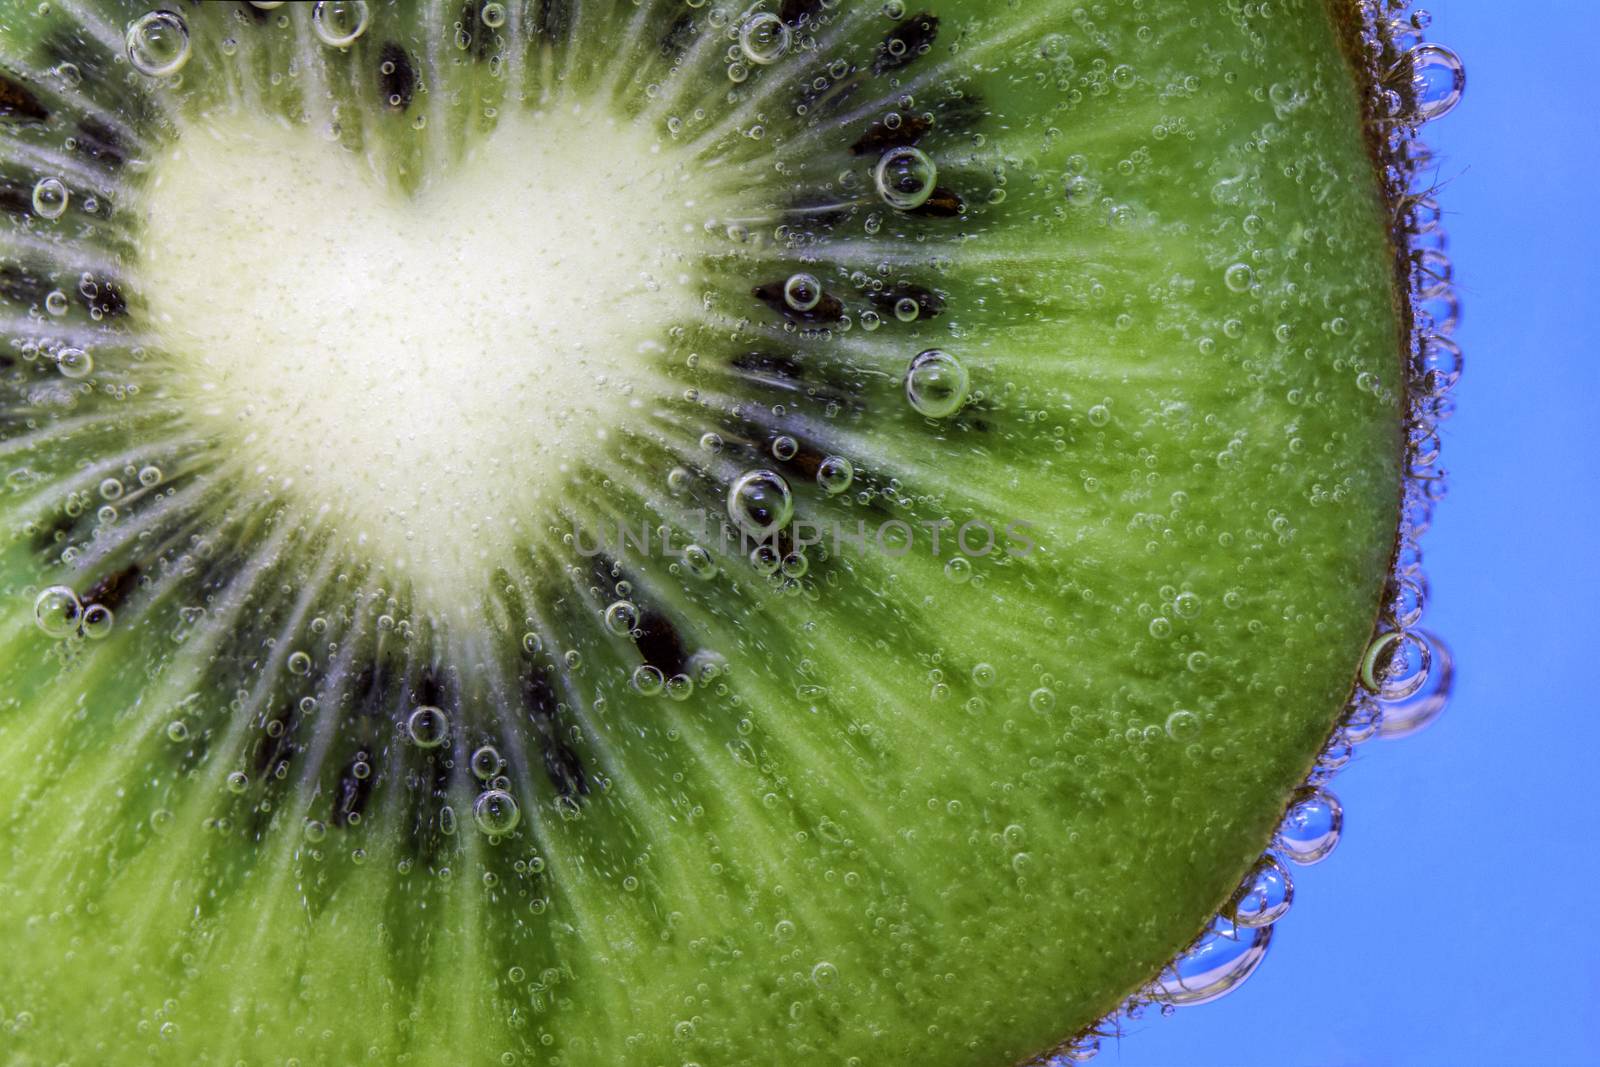 Closeup of a heart shaped kiwi slice covered in water bubbles